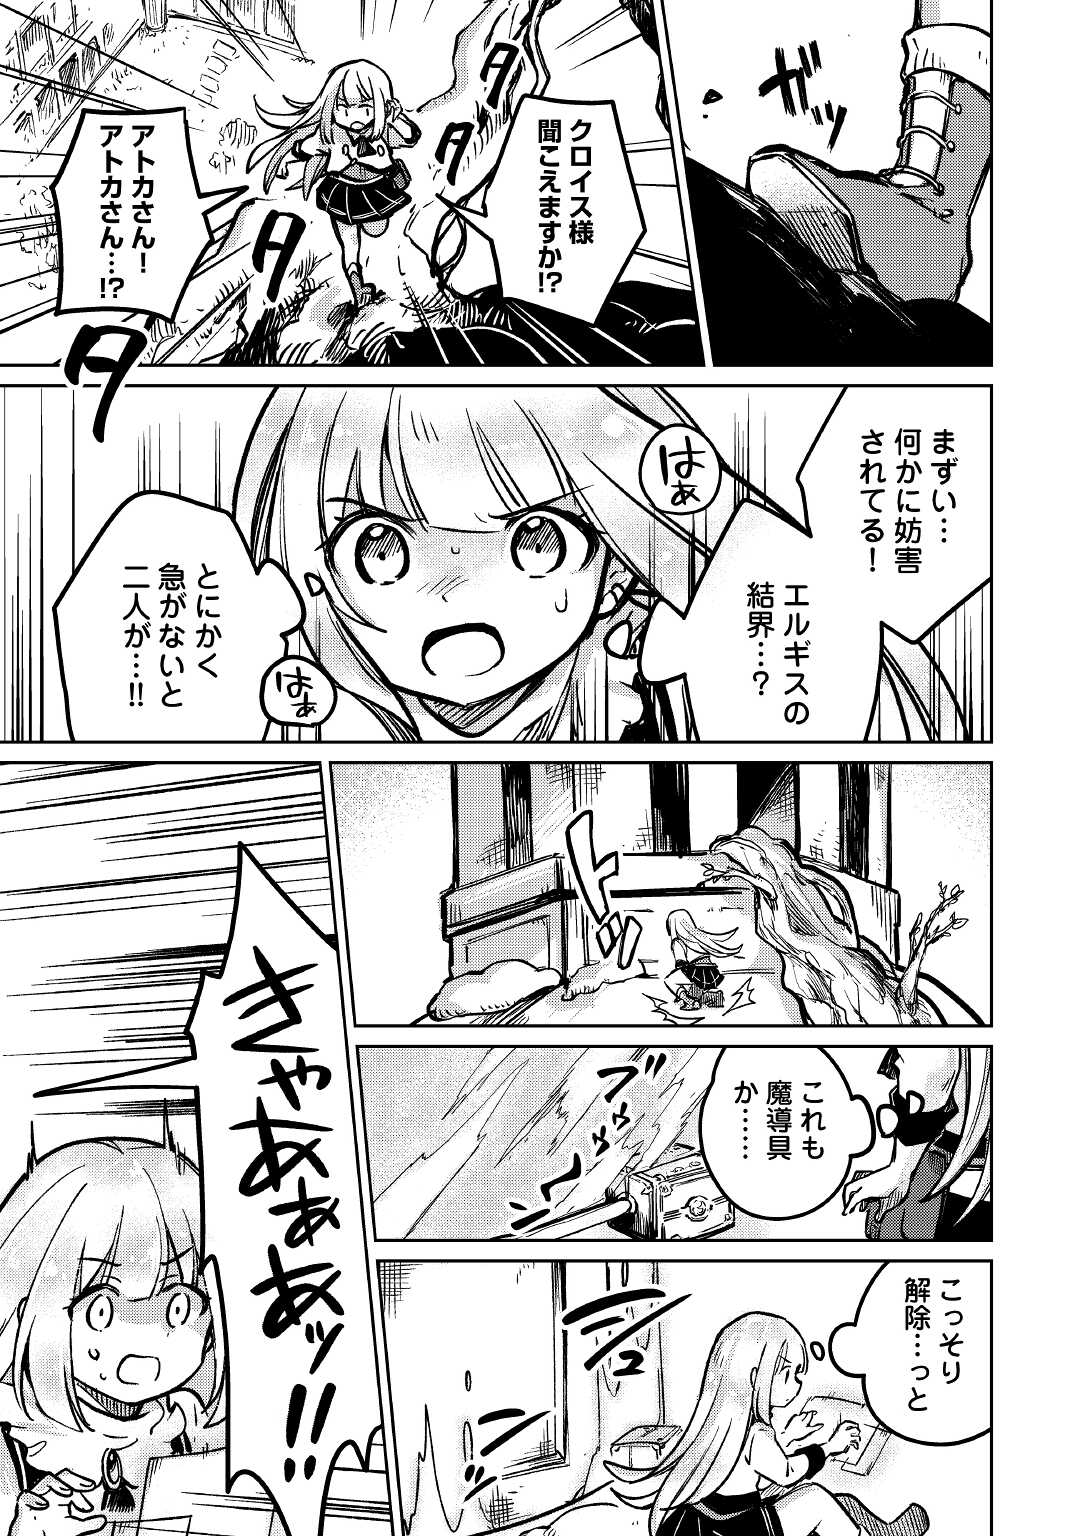 The Former Structural Researcher’s Story of Otherworldly Adventure 第39話 - Page 3